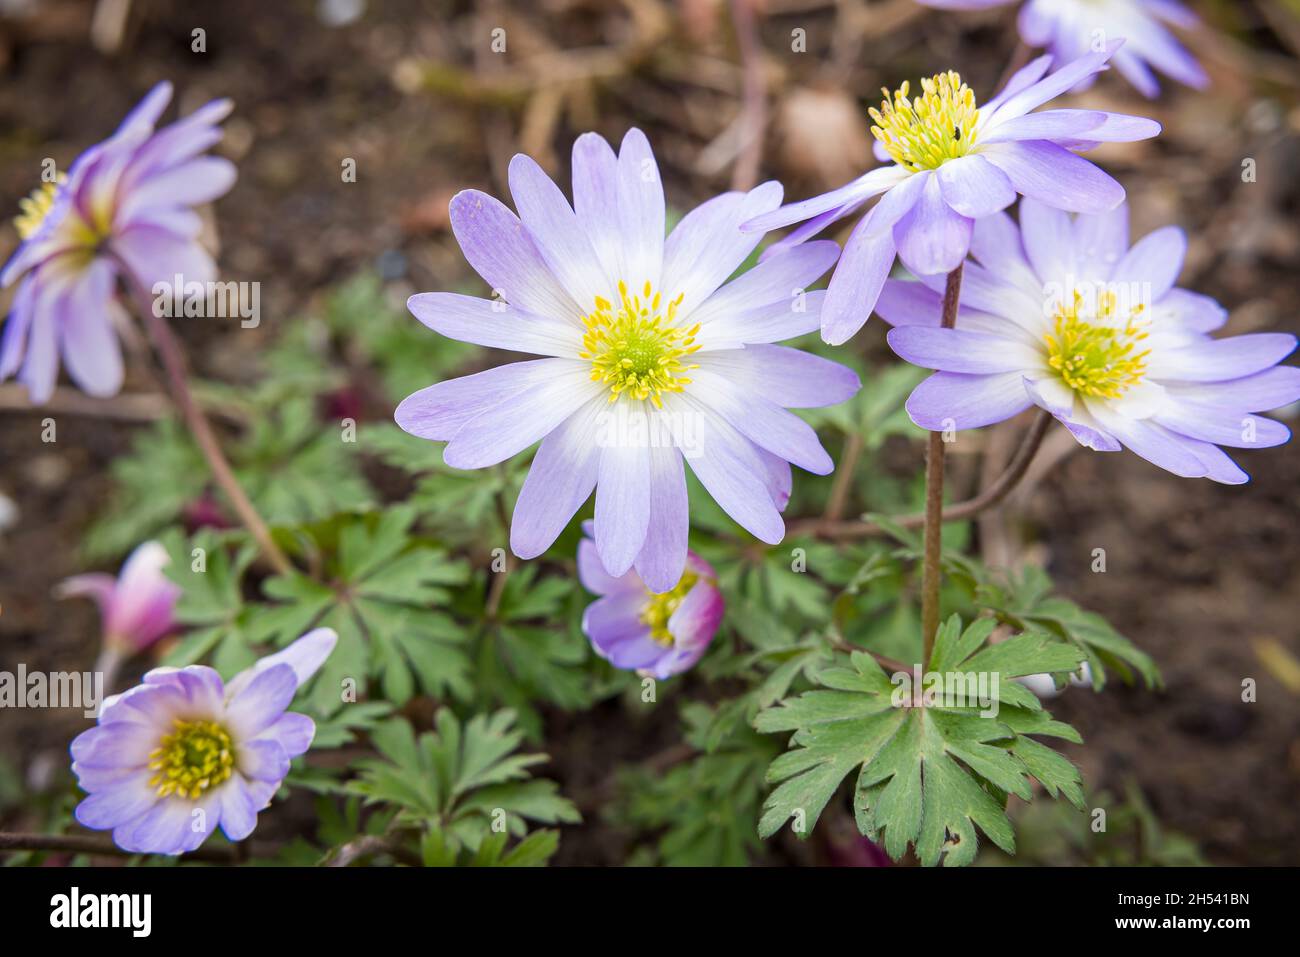 Anemone blanda plant close up with purple or blue flowers, detail of perennial plants flowering in spring in a UK garden border Stock Photo